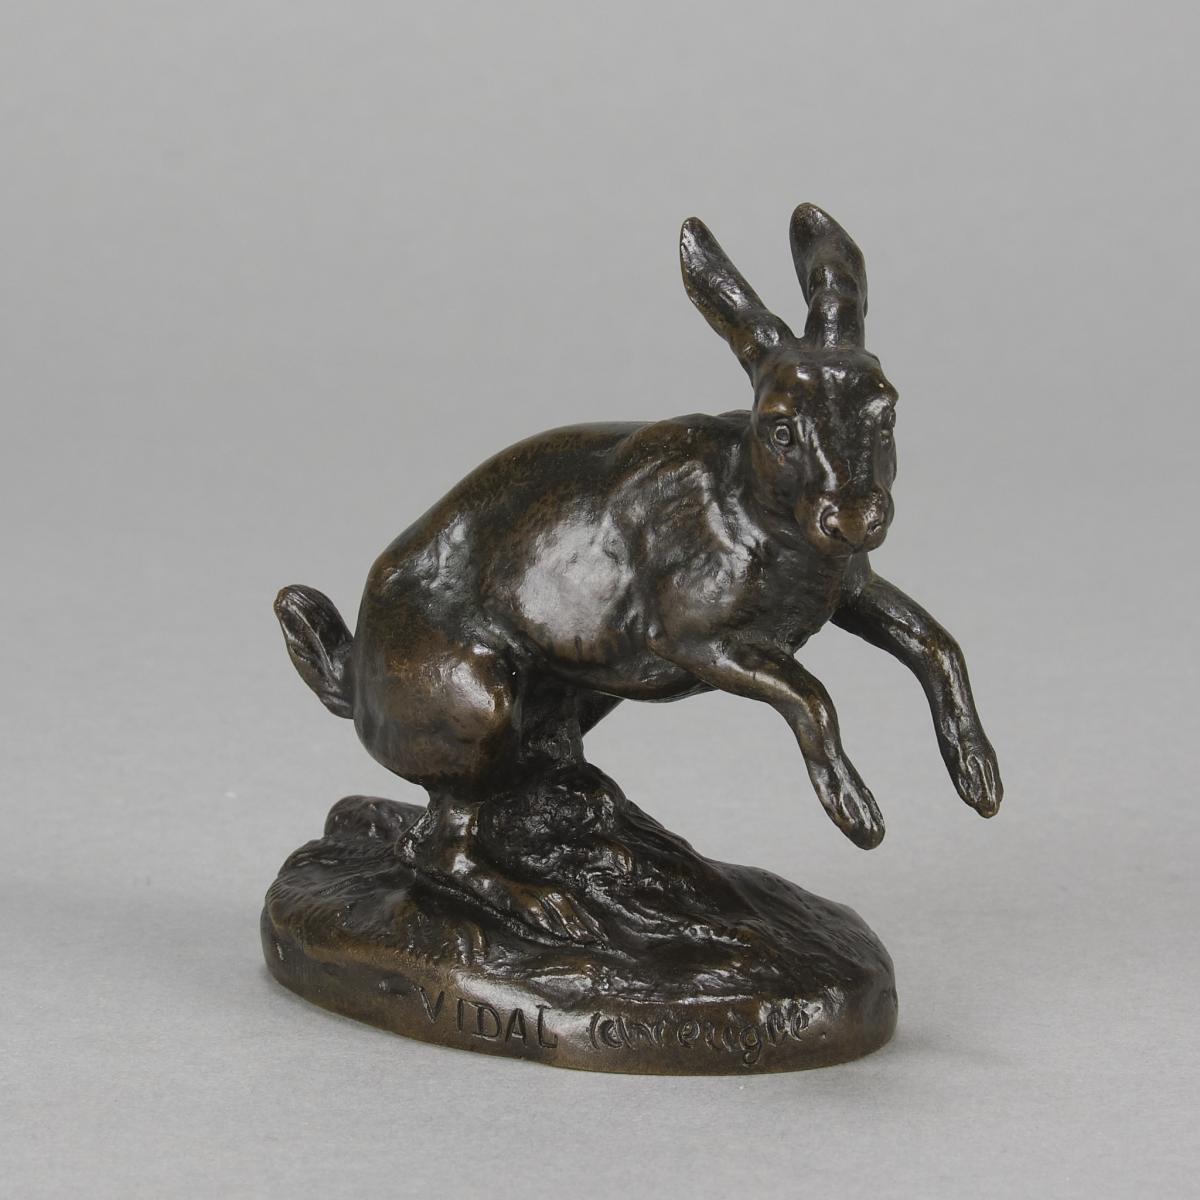  Early 20th Century Animalier Bronze entitled "Leaping Hare" by Louis Vidal